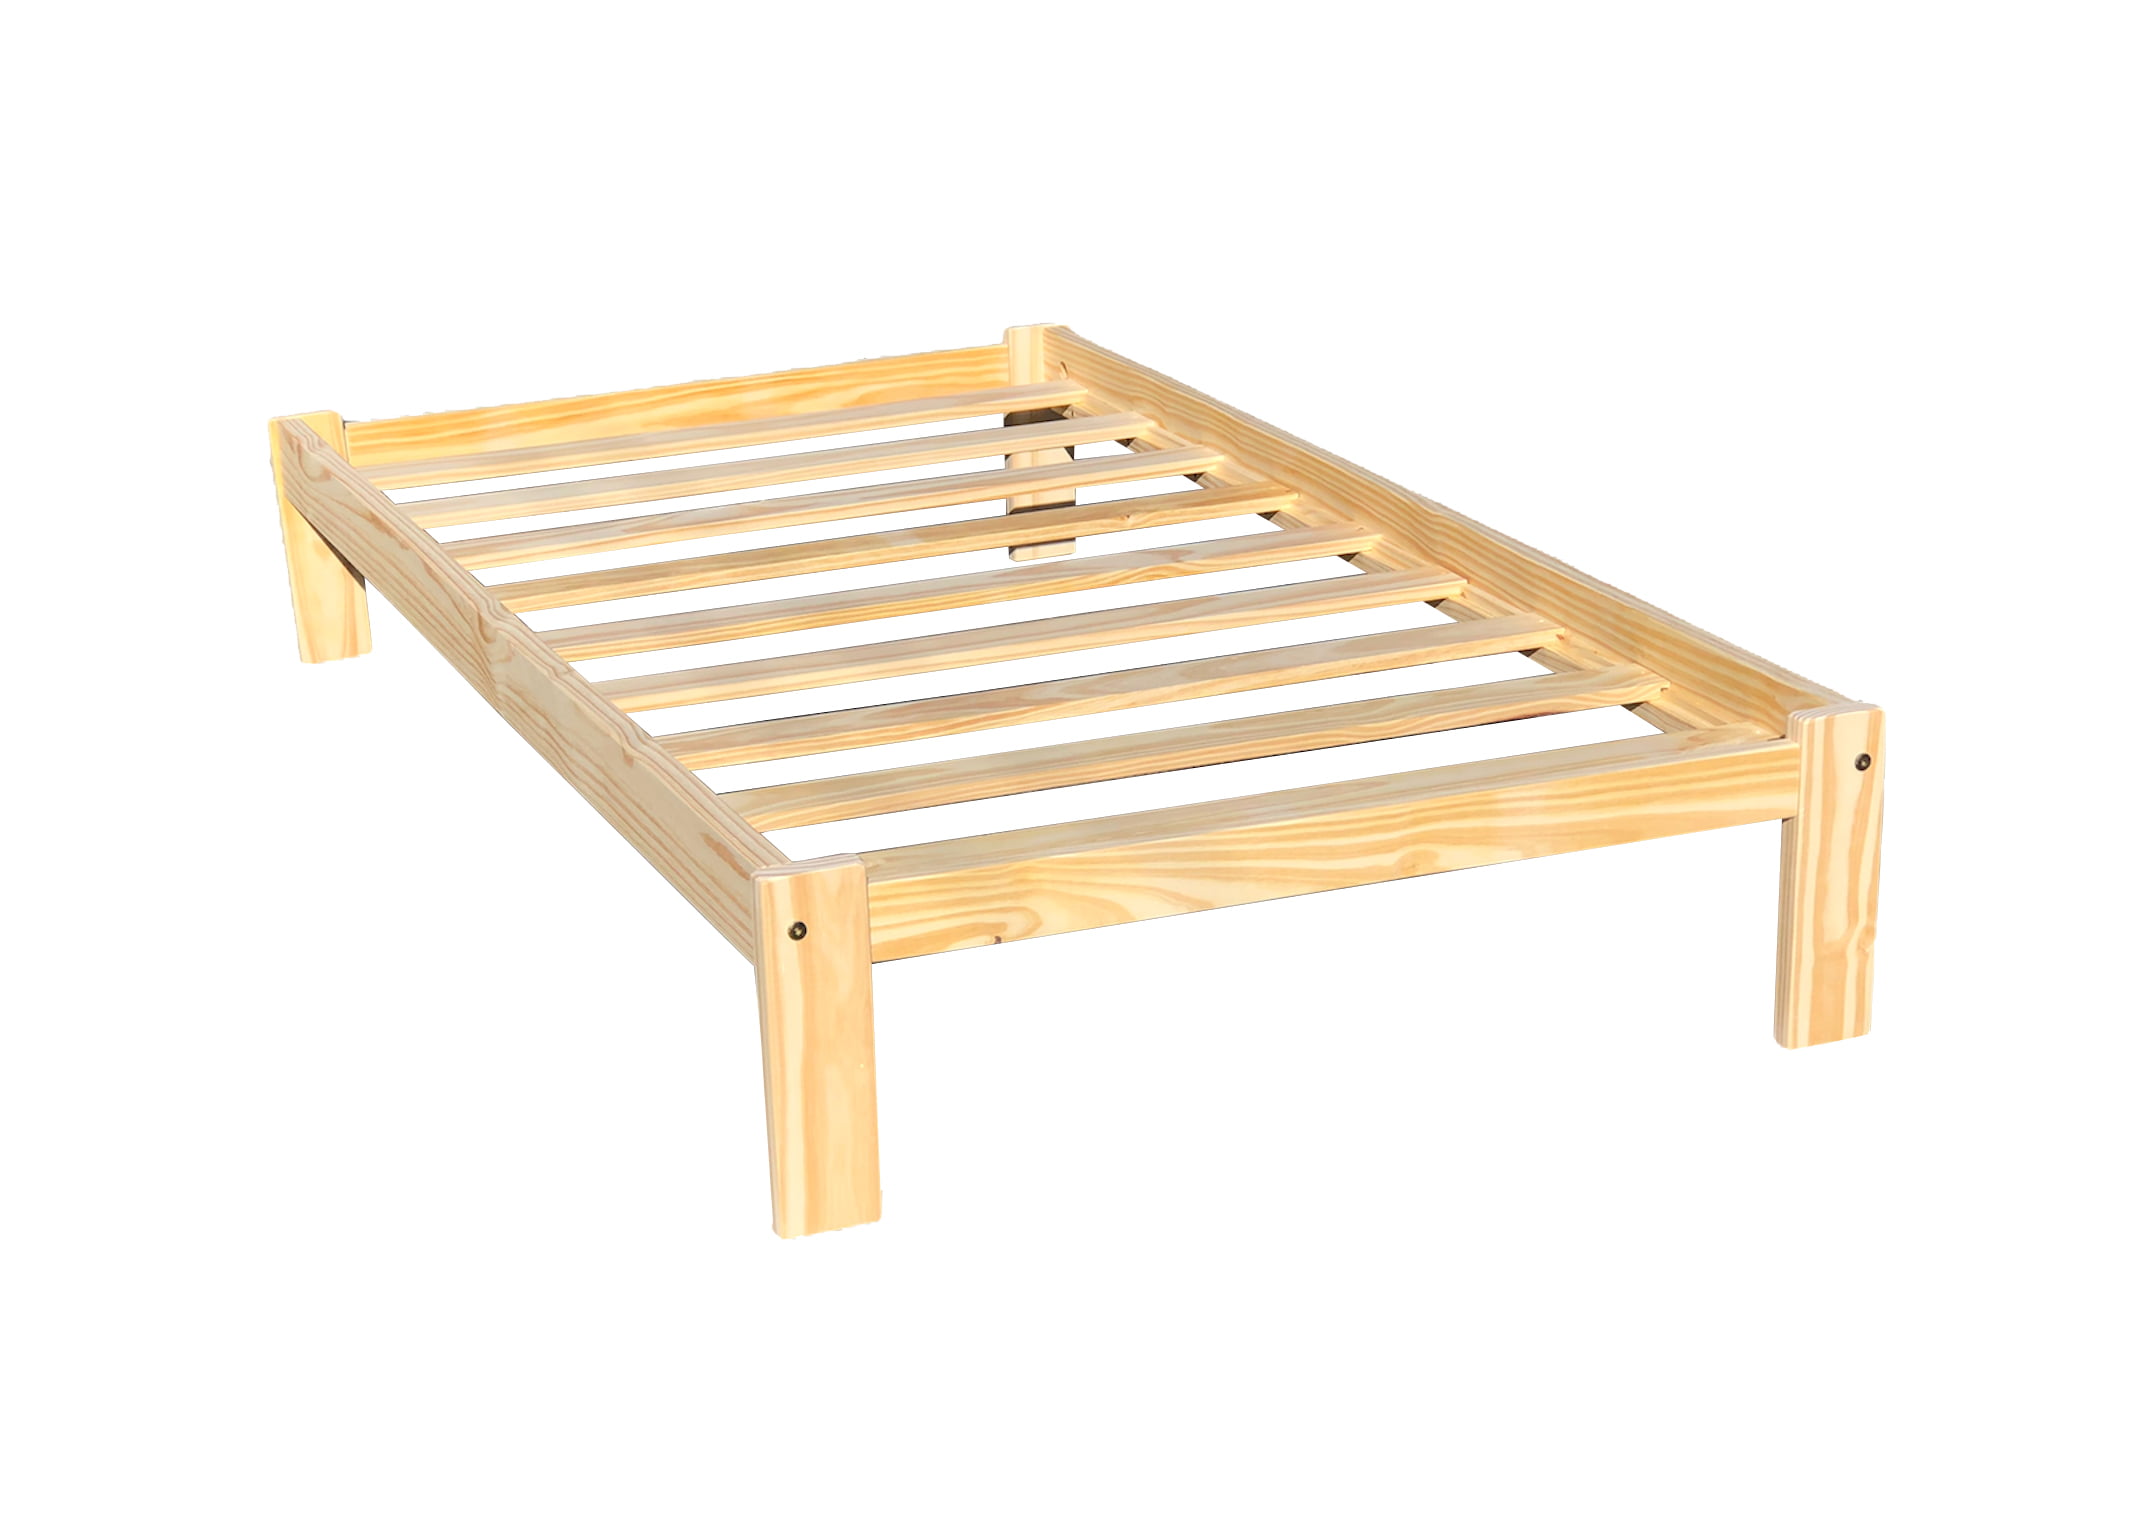 Alaska Wooden Twin Xl Bed Platform, Twin Size Bed Frame Dimensions